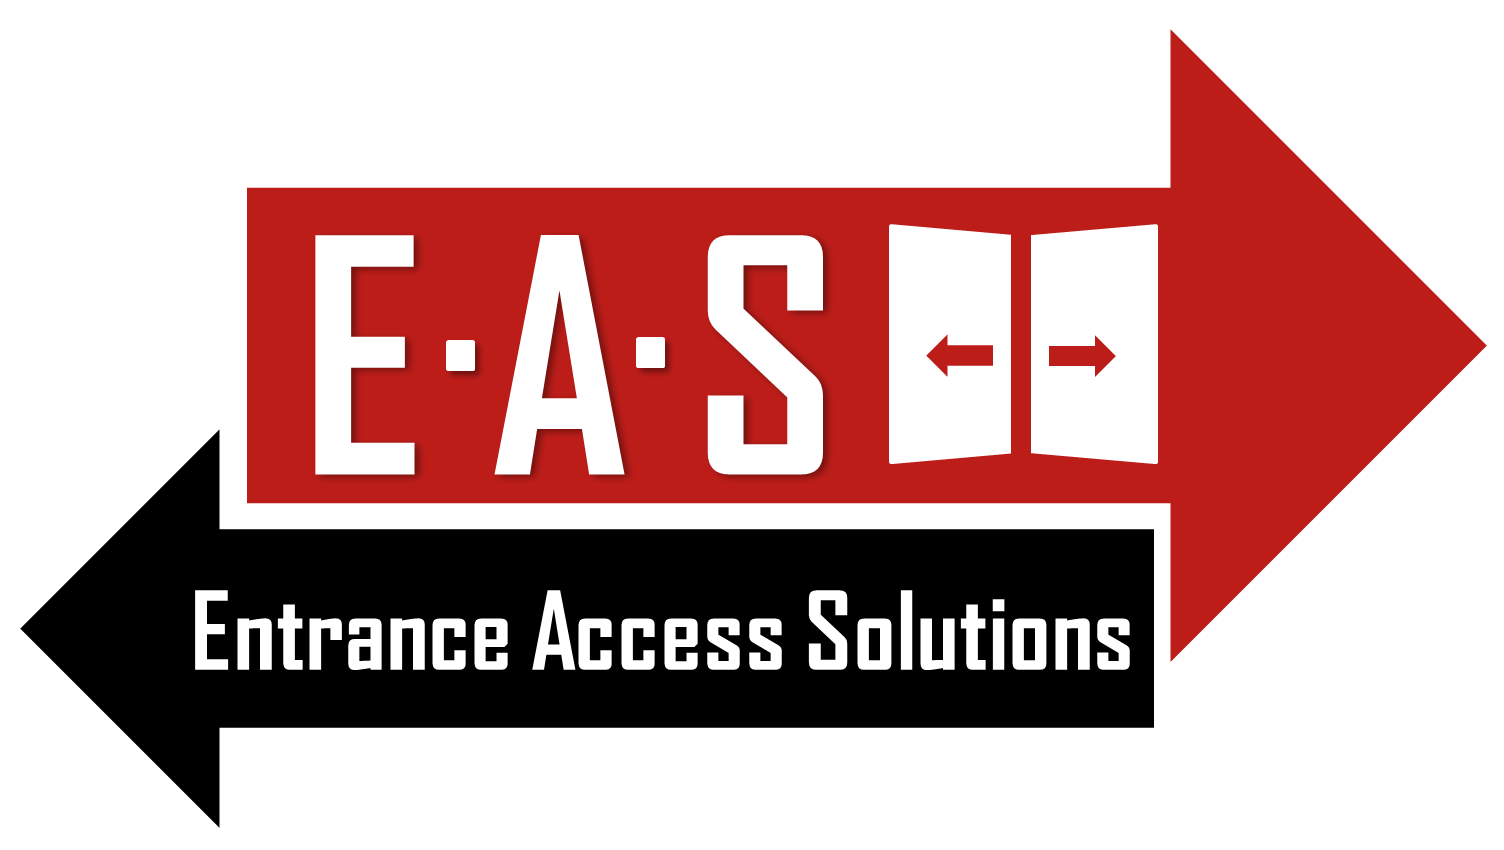 Access solutions. Entrance Card.